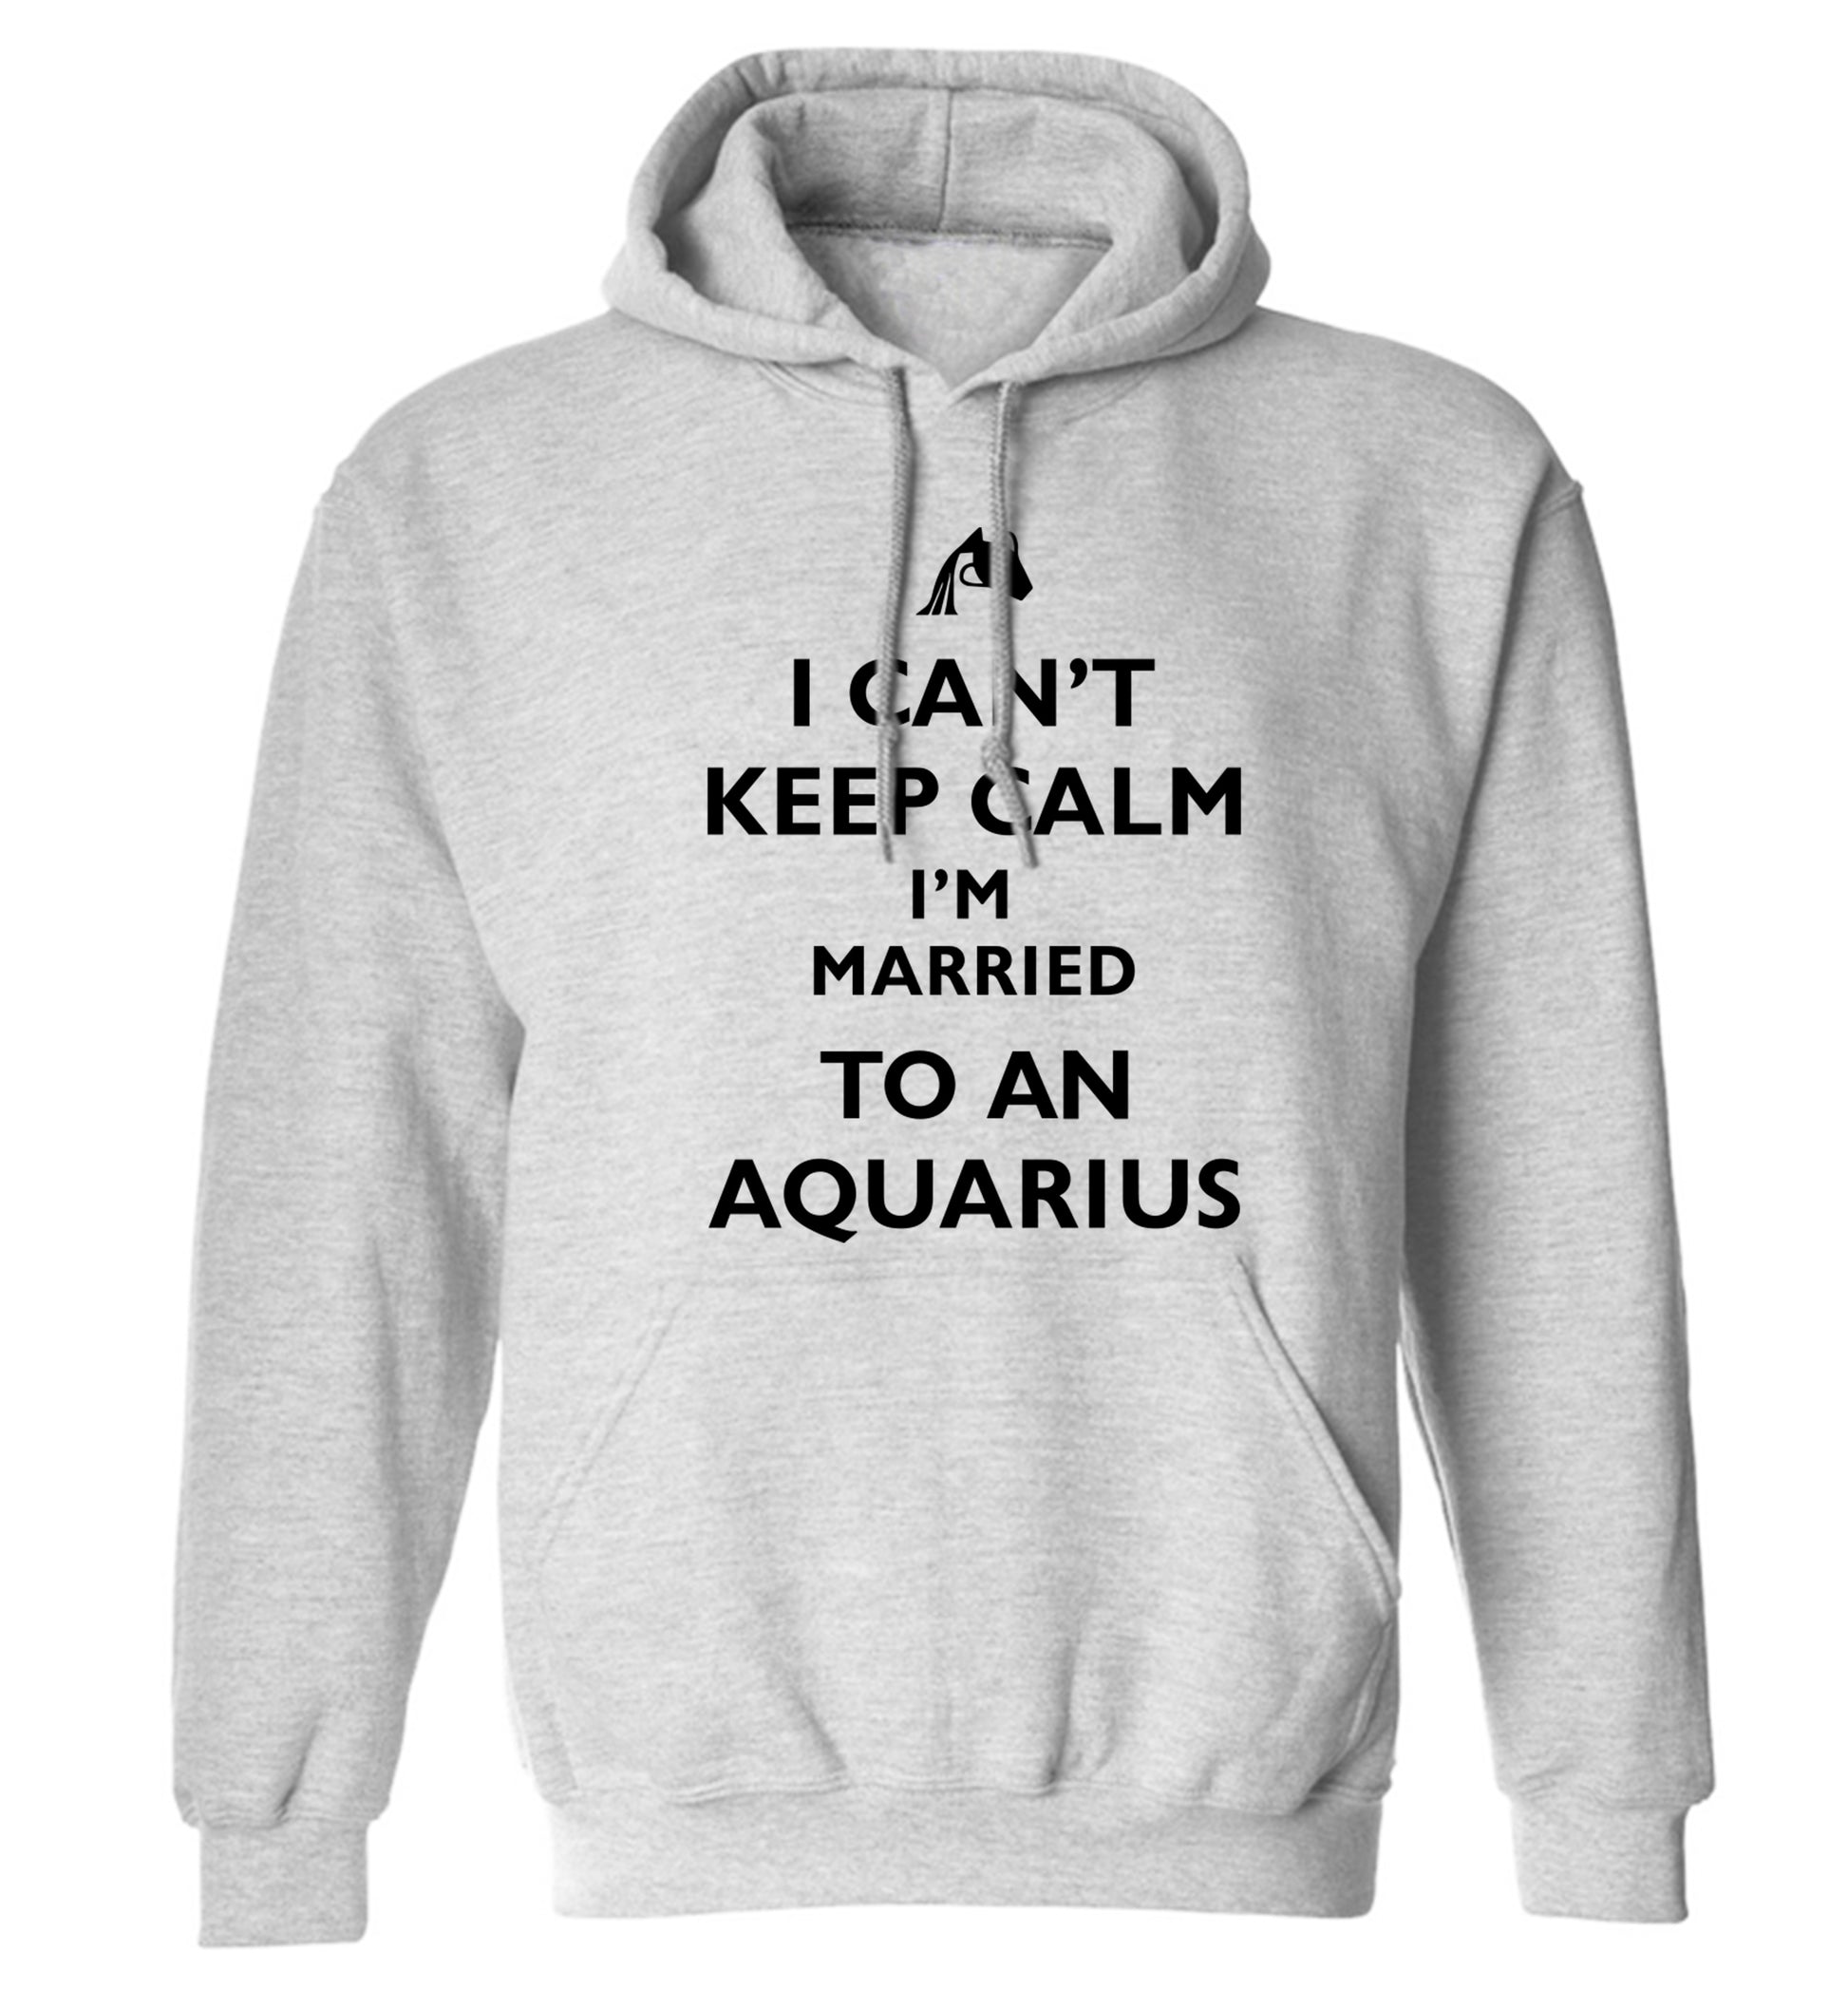 I can't keep calm I'm married to an aquarius adults unisex grey hoodie 2XL